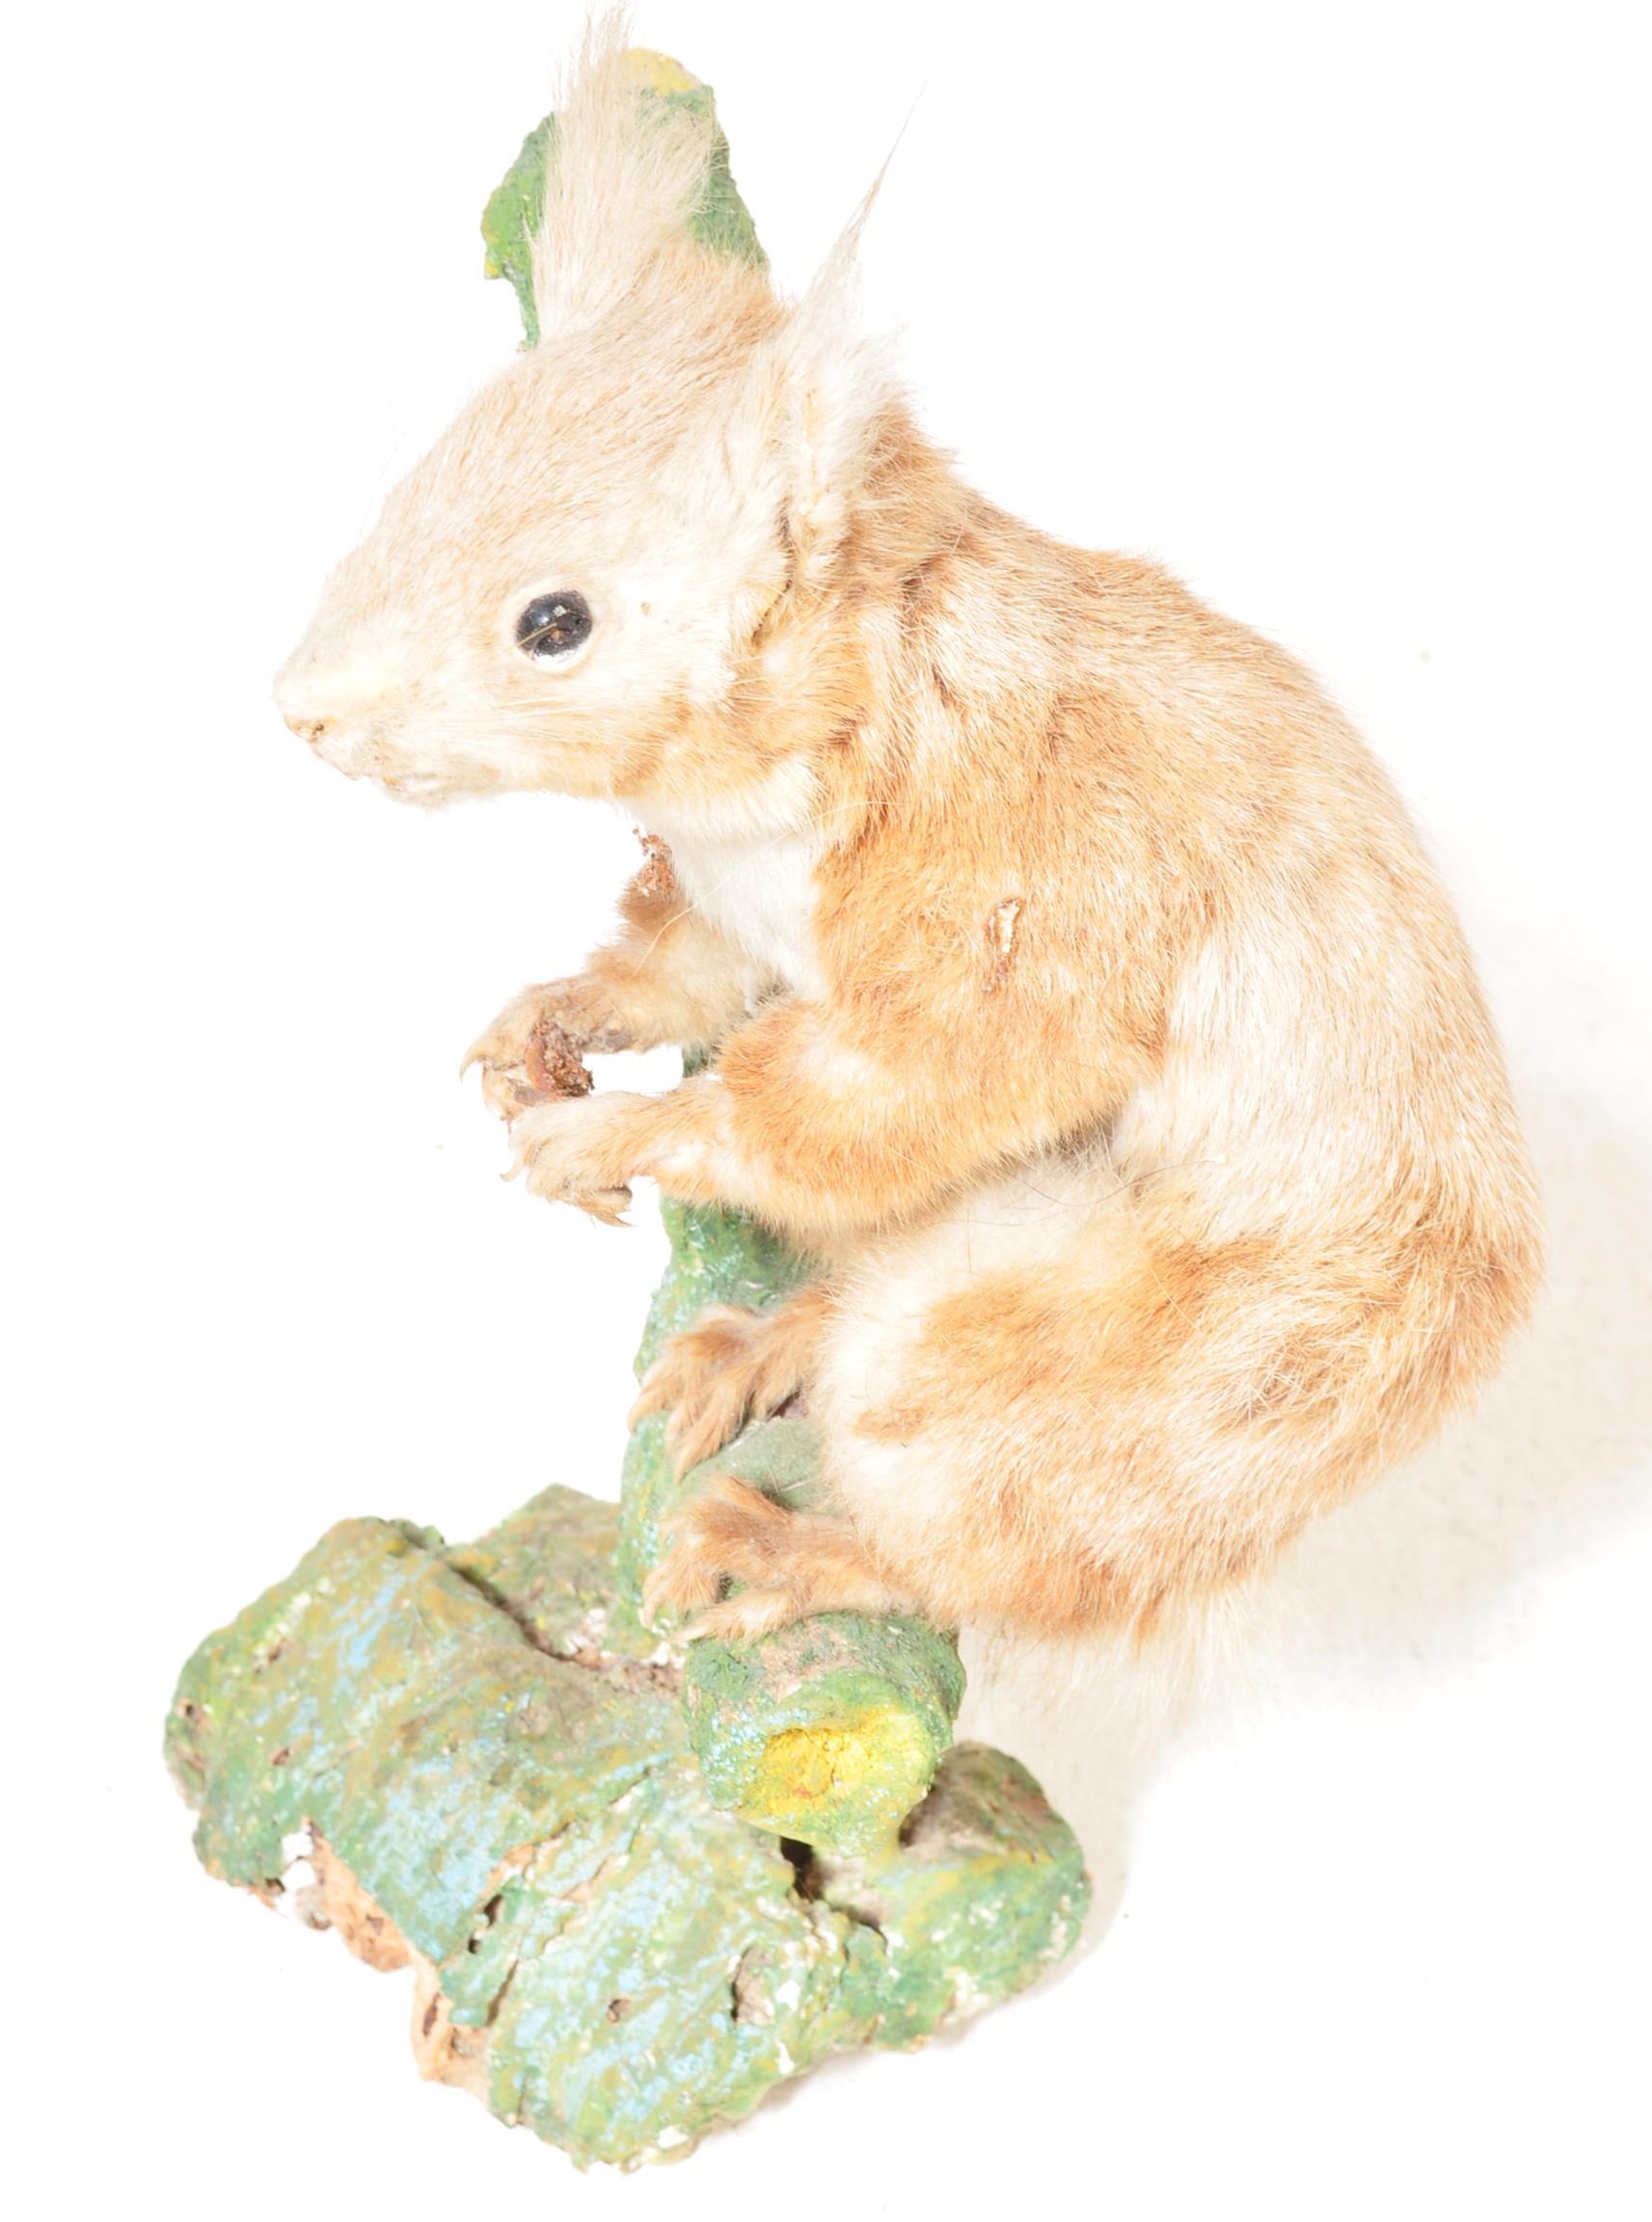 OF TAXIDERMY INTEREST - COLLECTION OF 20TH CENTURY TAXIDERMY - Image 12 of 16